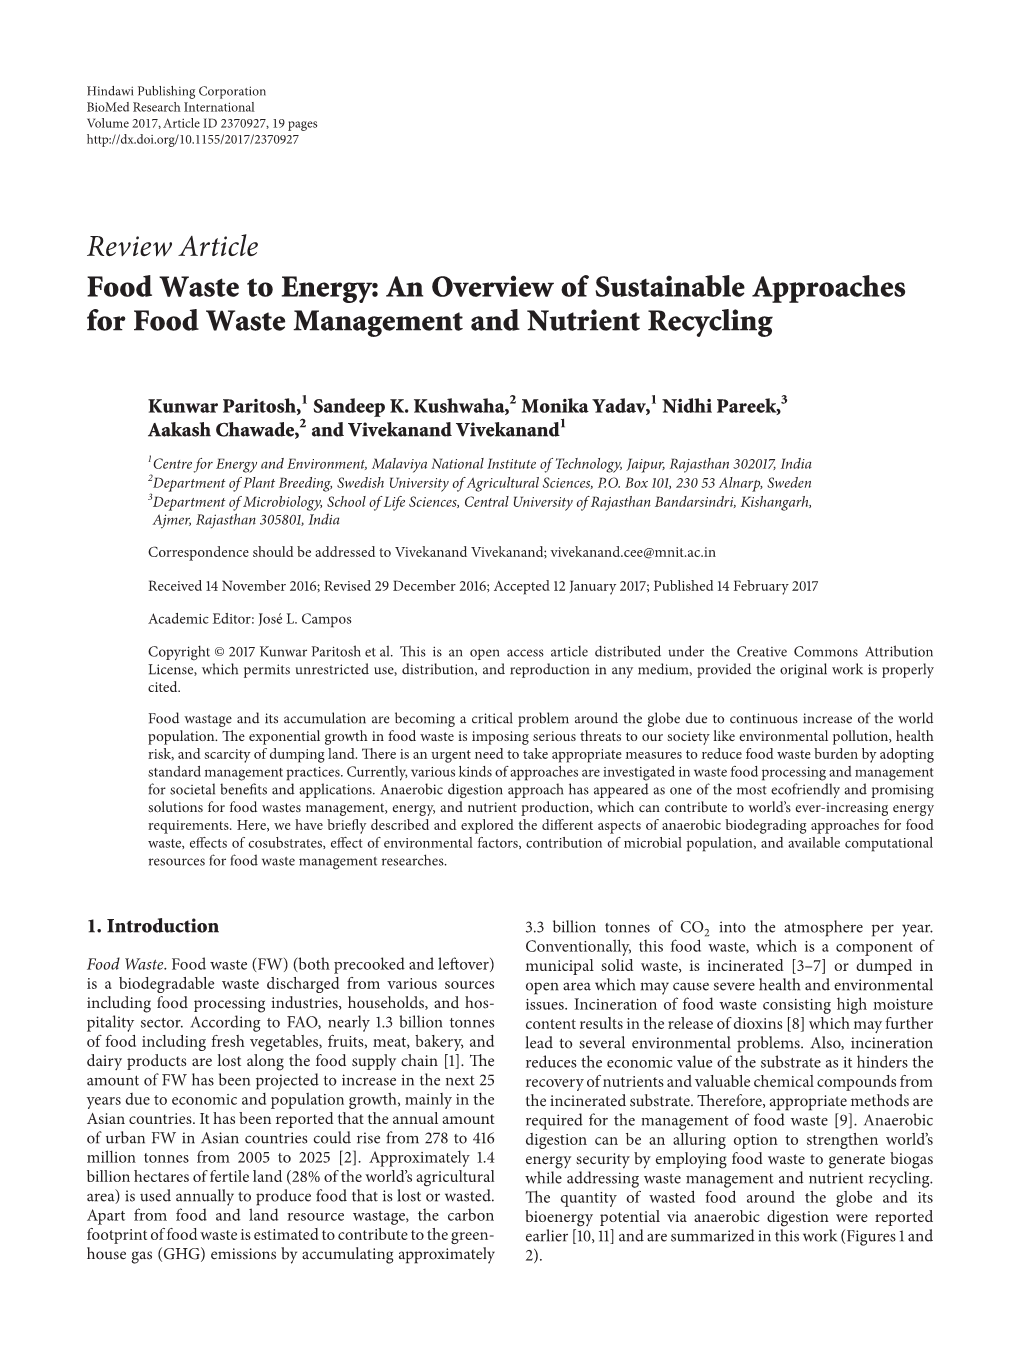 Review Article Food Waste to Energy: an Overview of Sustainable Approaches for Food Waste Management and Nutrient Recycling